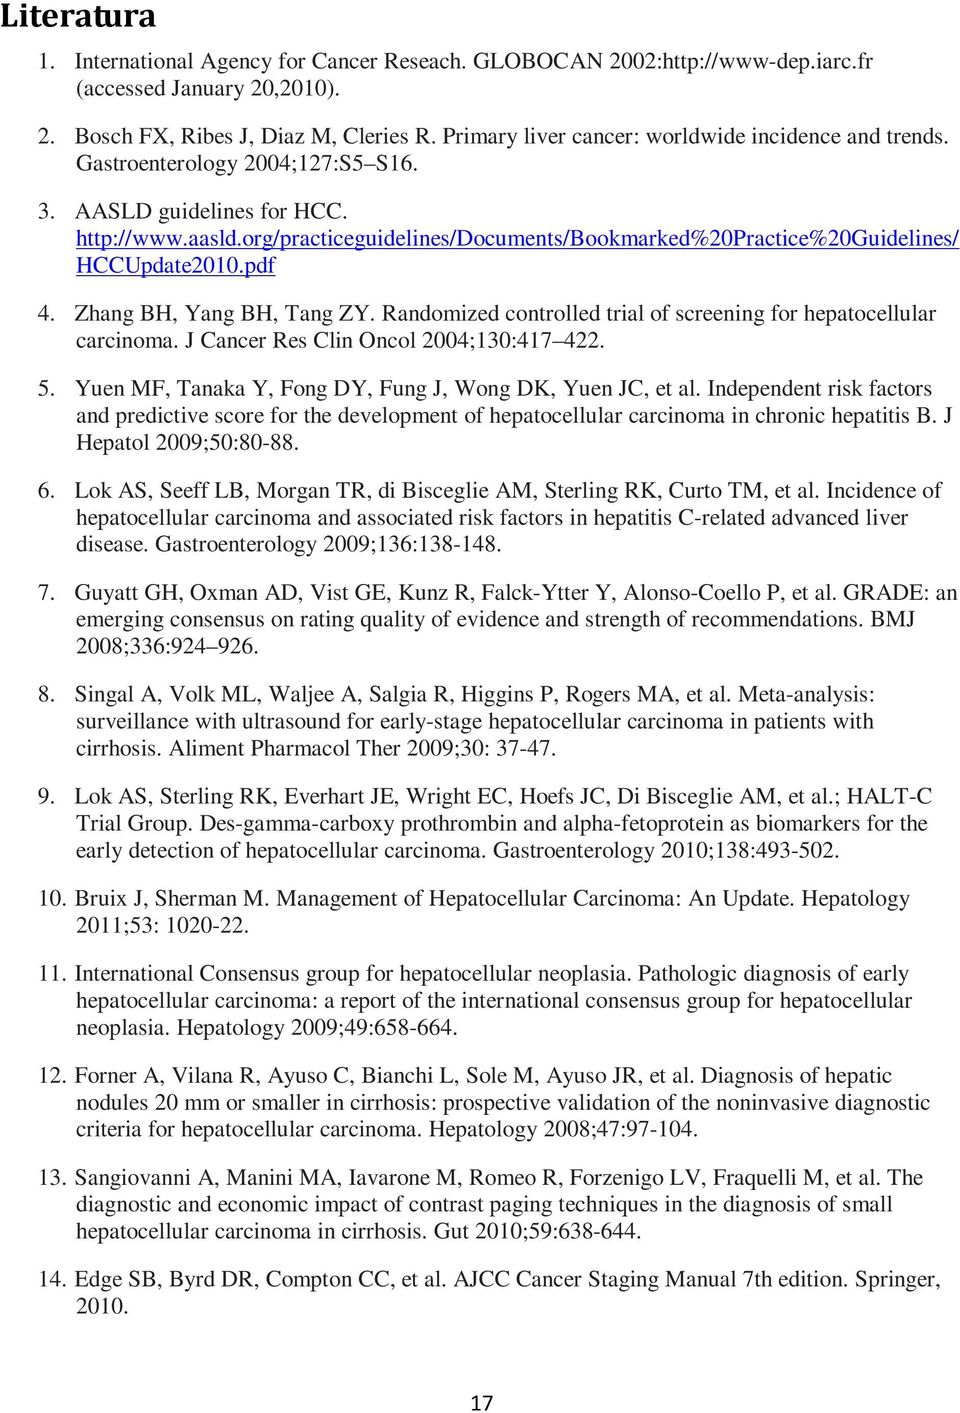 org/practiceguidelines/documents/bookmarked%20practice%20guidelines/ HCCUpdate2010.pdf 4. Zhang BH, Yang BH, Tang ZY. Randomized controlled trial of screening for hepatocellular carcinoma.